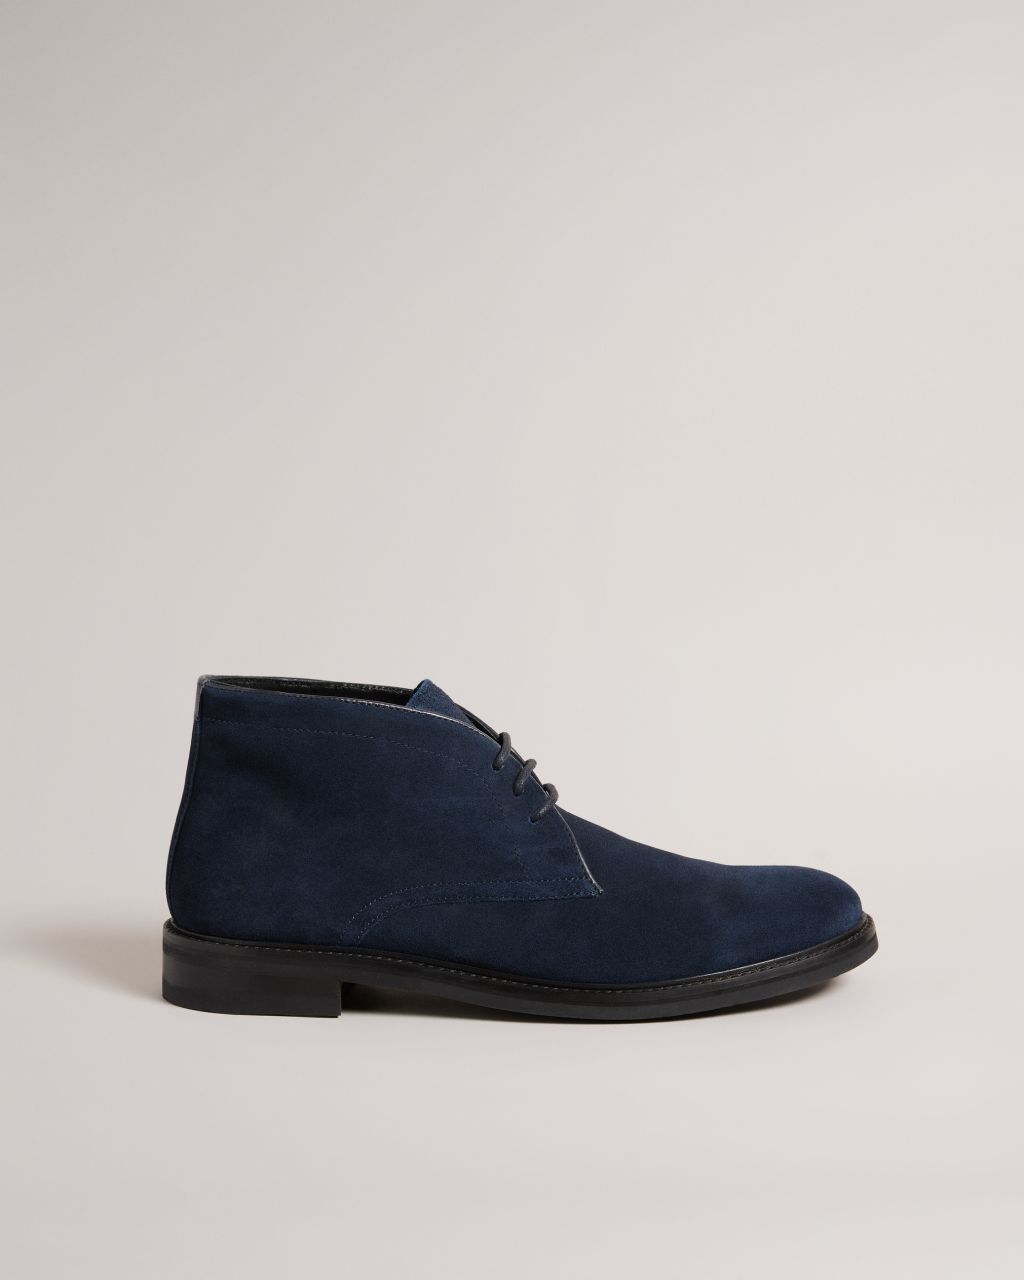 Ted Baker Men's Suede Chukka Button Sole Boots in Navy, Andrews, Leather